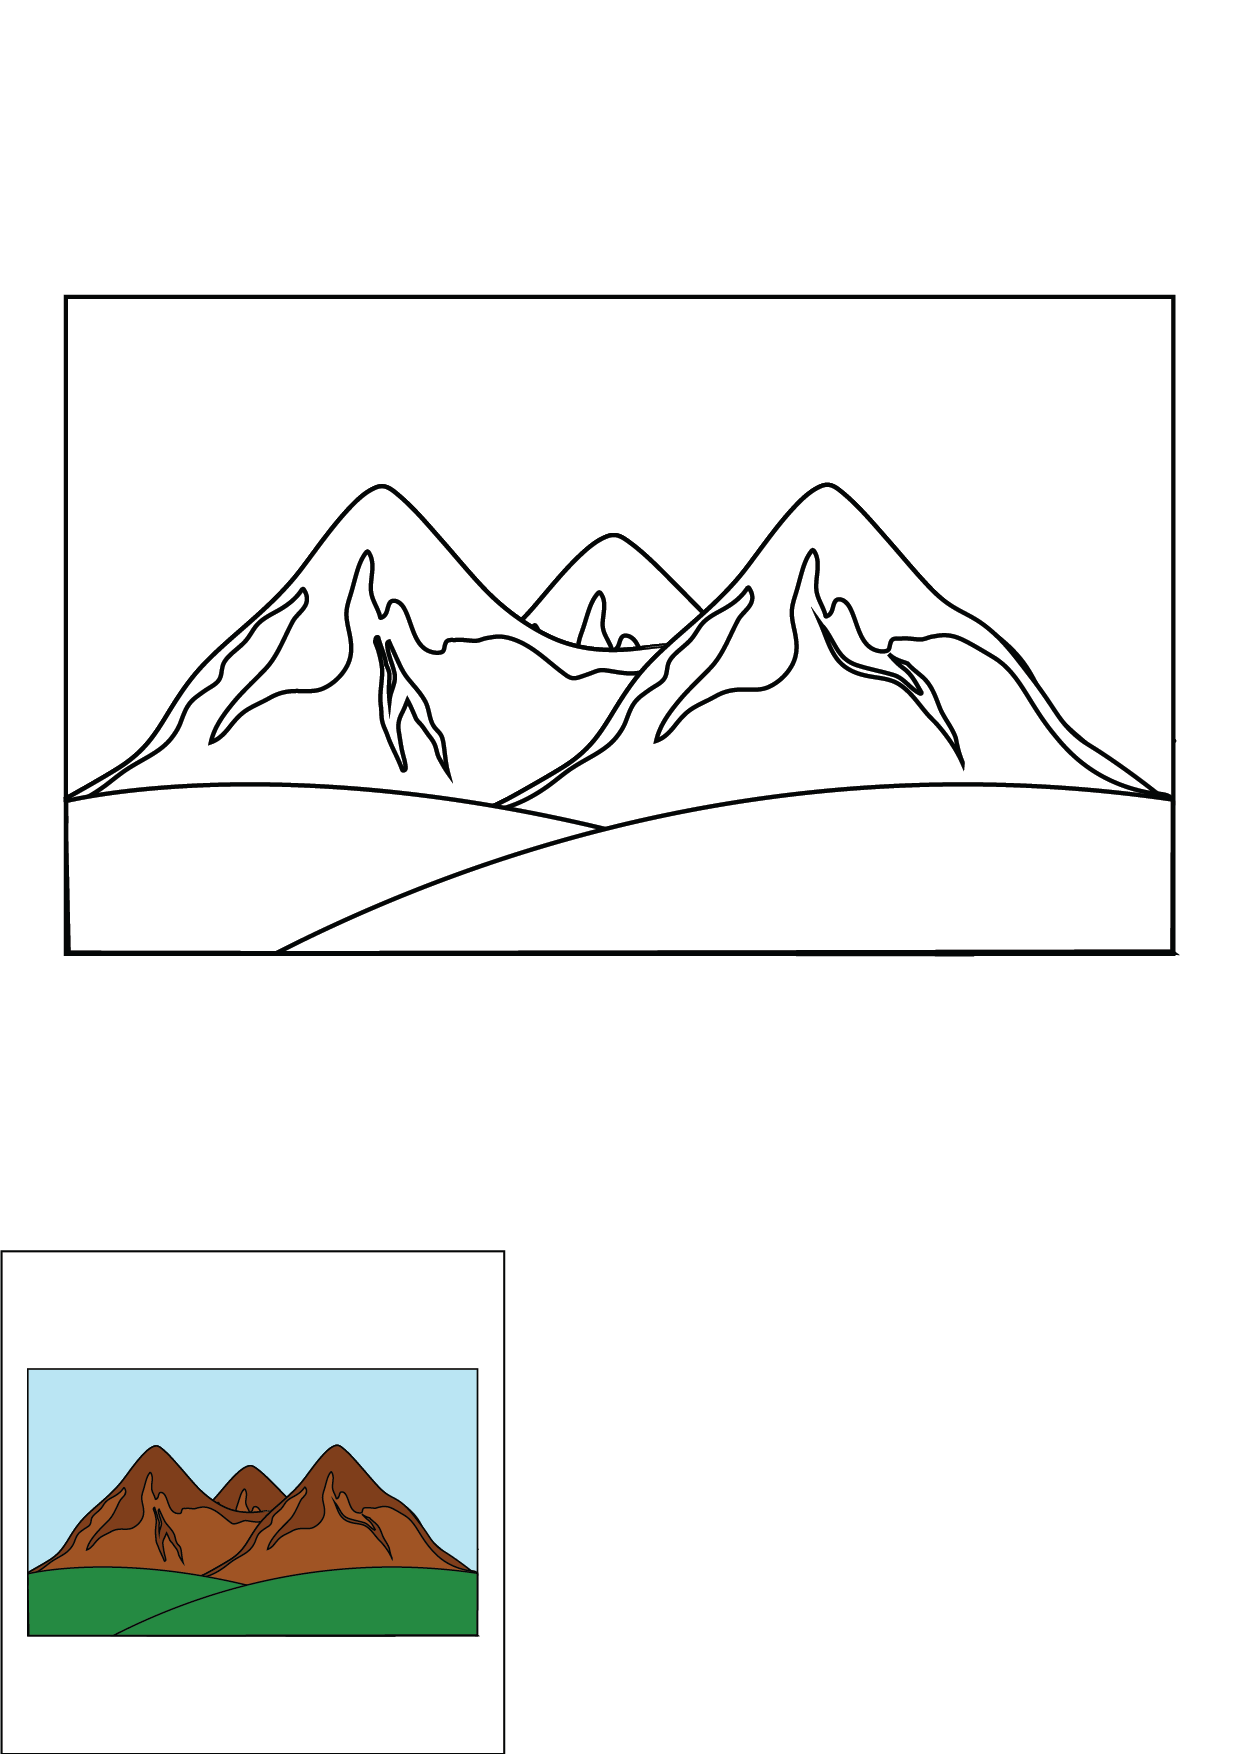 How to Draw The Mountains Step by Step Printable Color